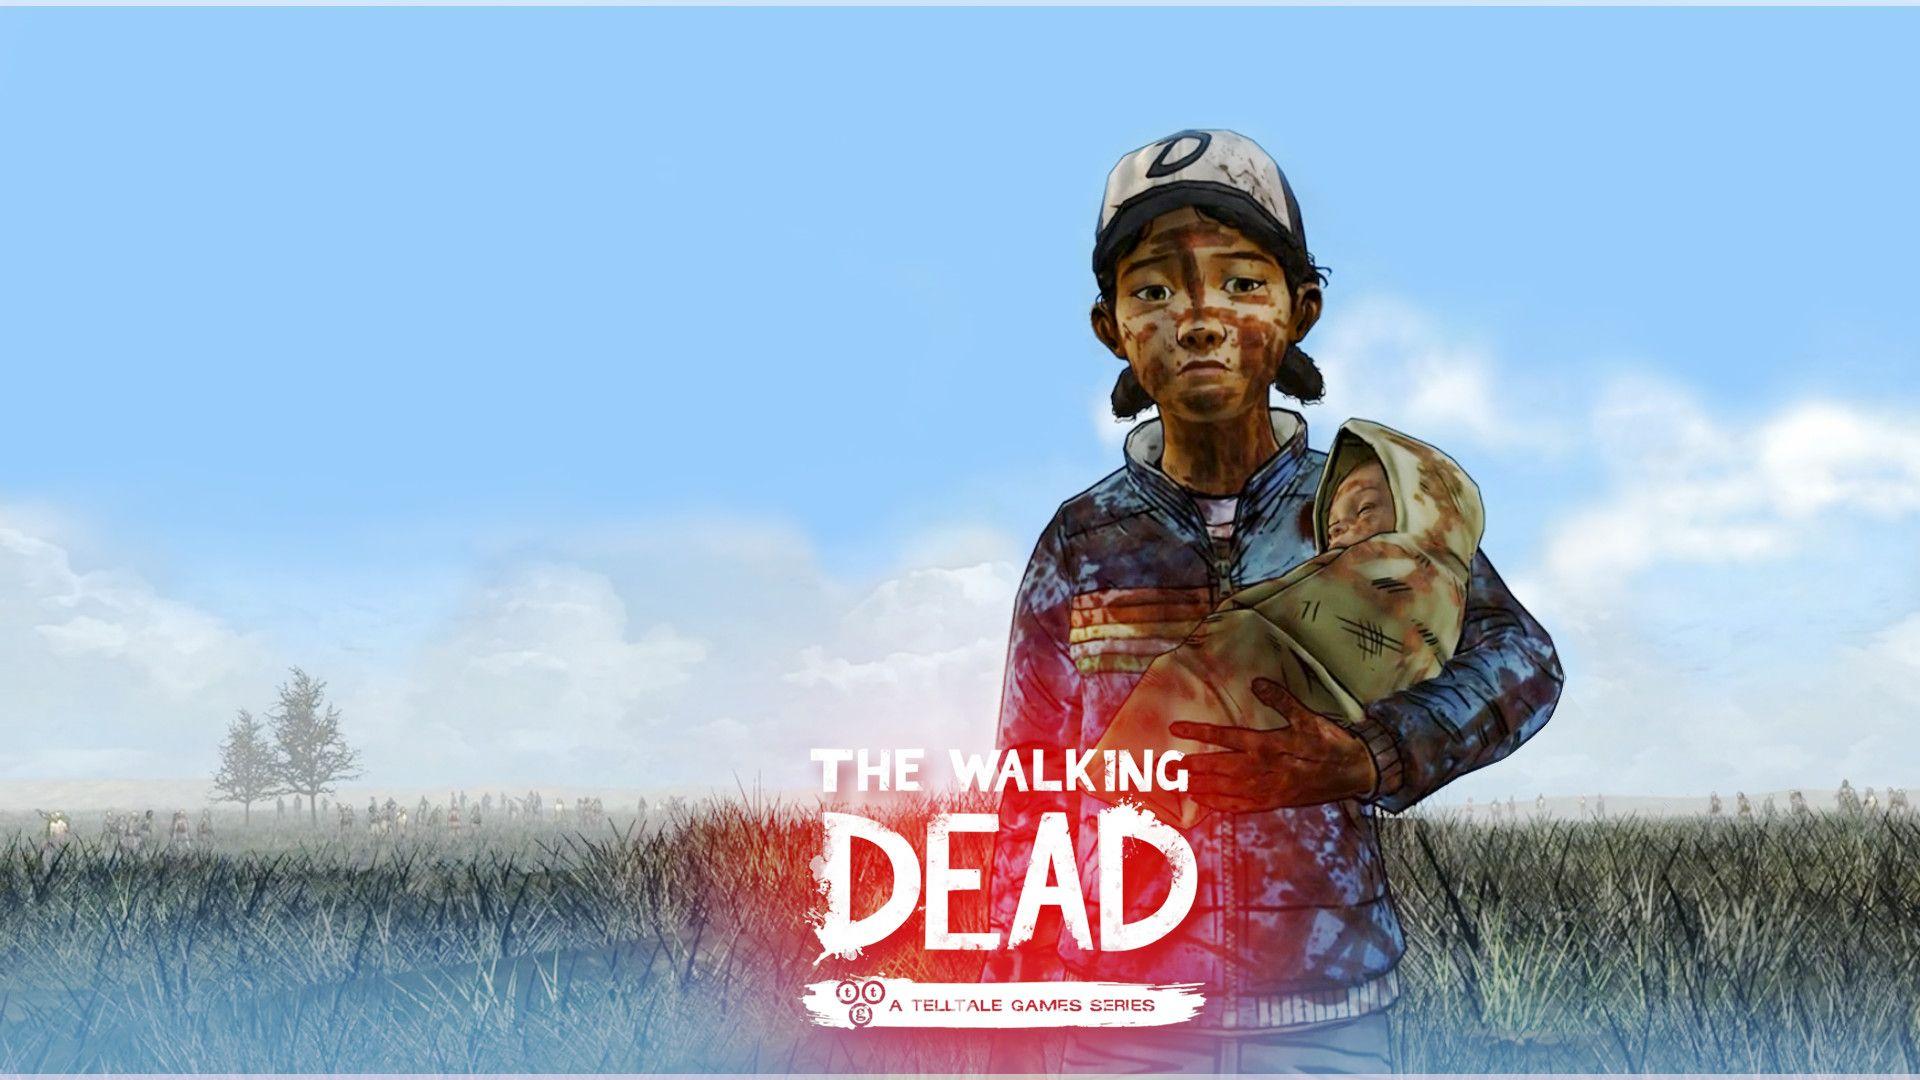 The Walking Dead Game Wallpaper background picture